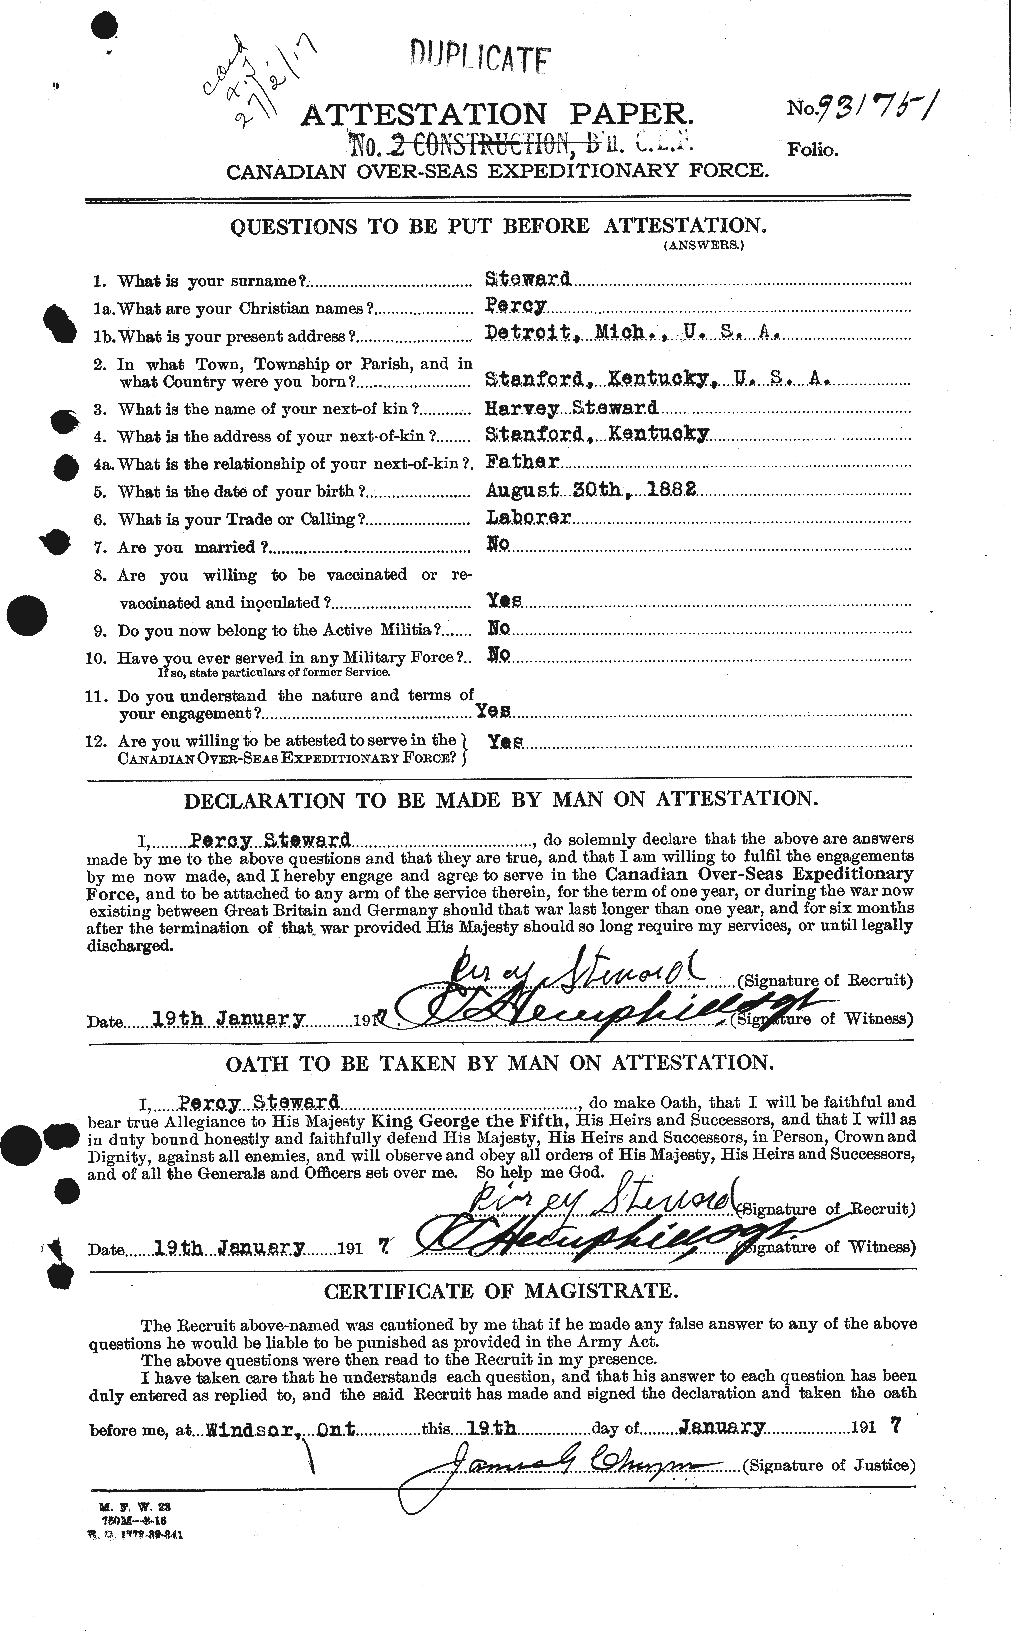 Personnel Records of the First World War - CEF 118724a